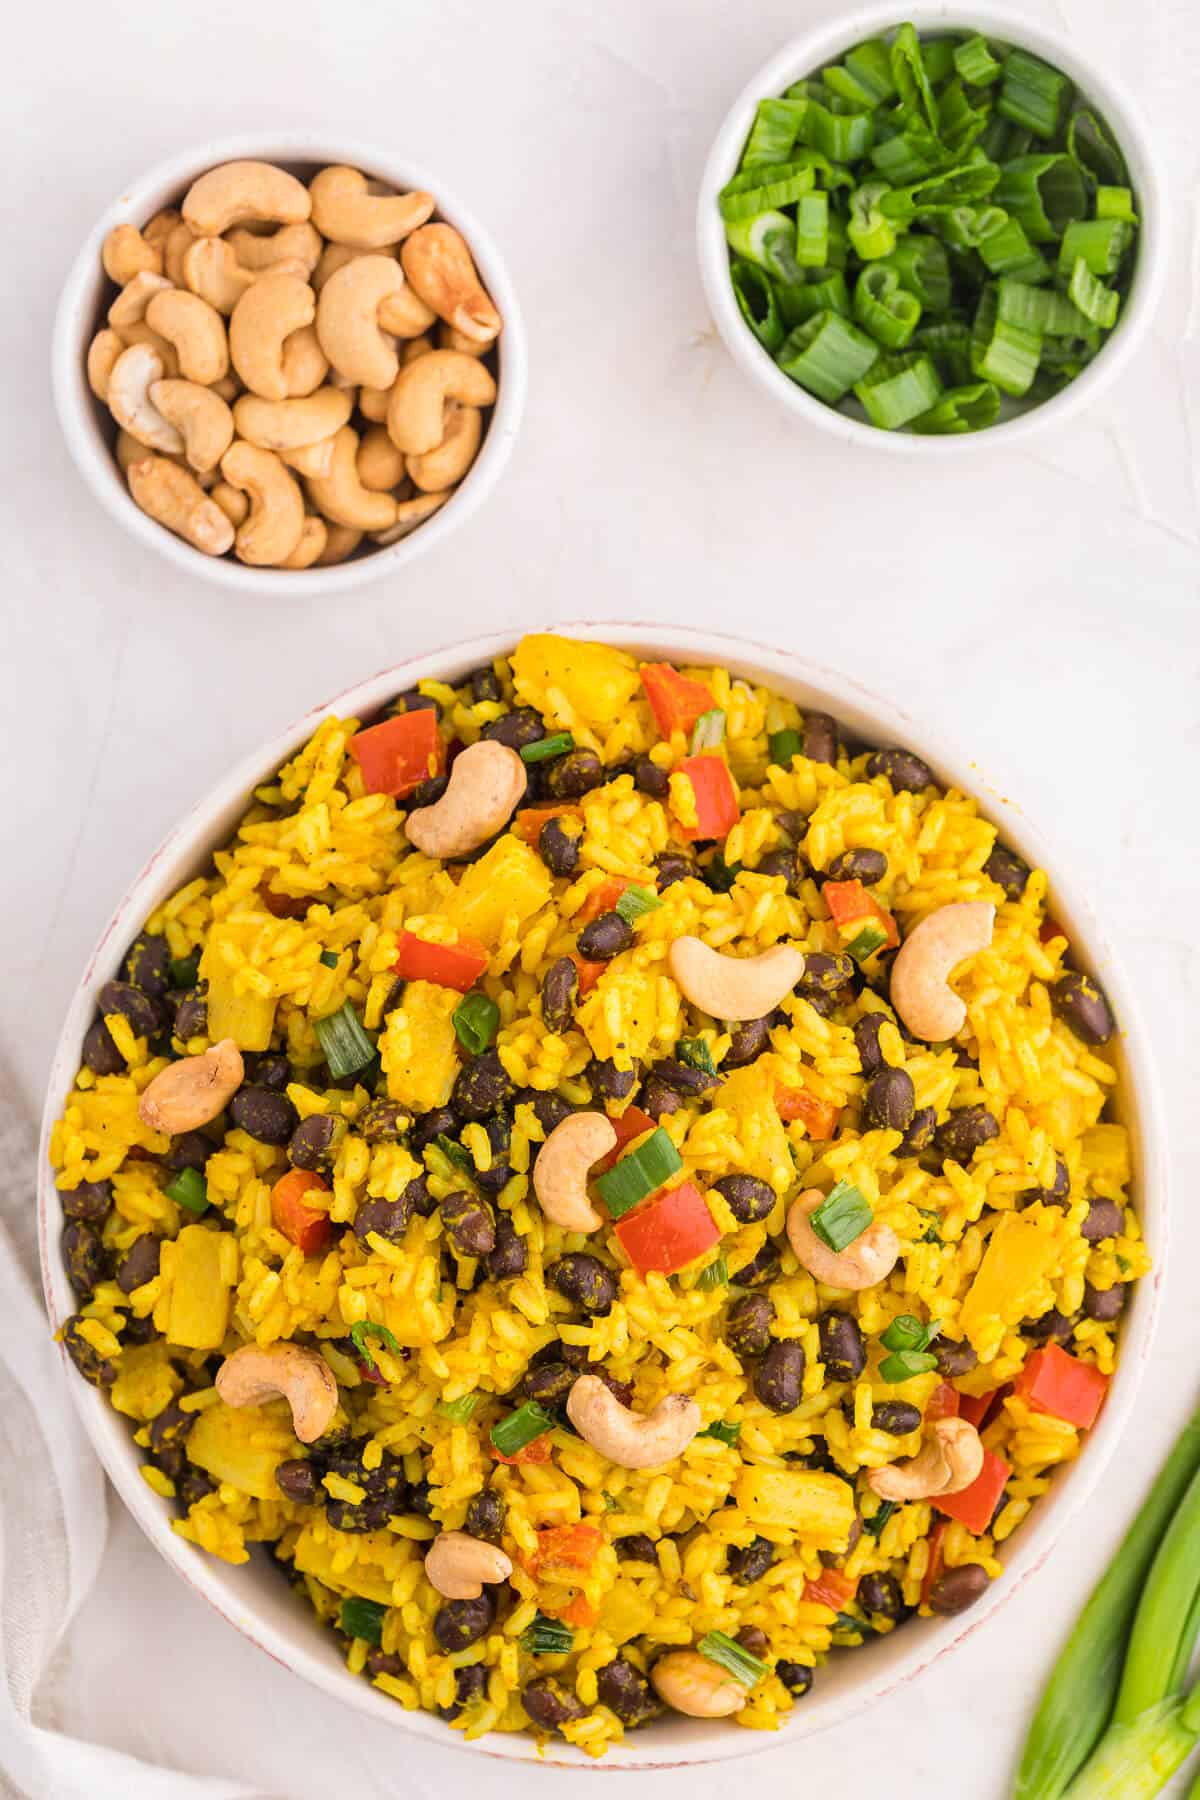 Jamaican curried rice in a bowl with cashews and green onions on the side.